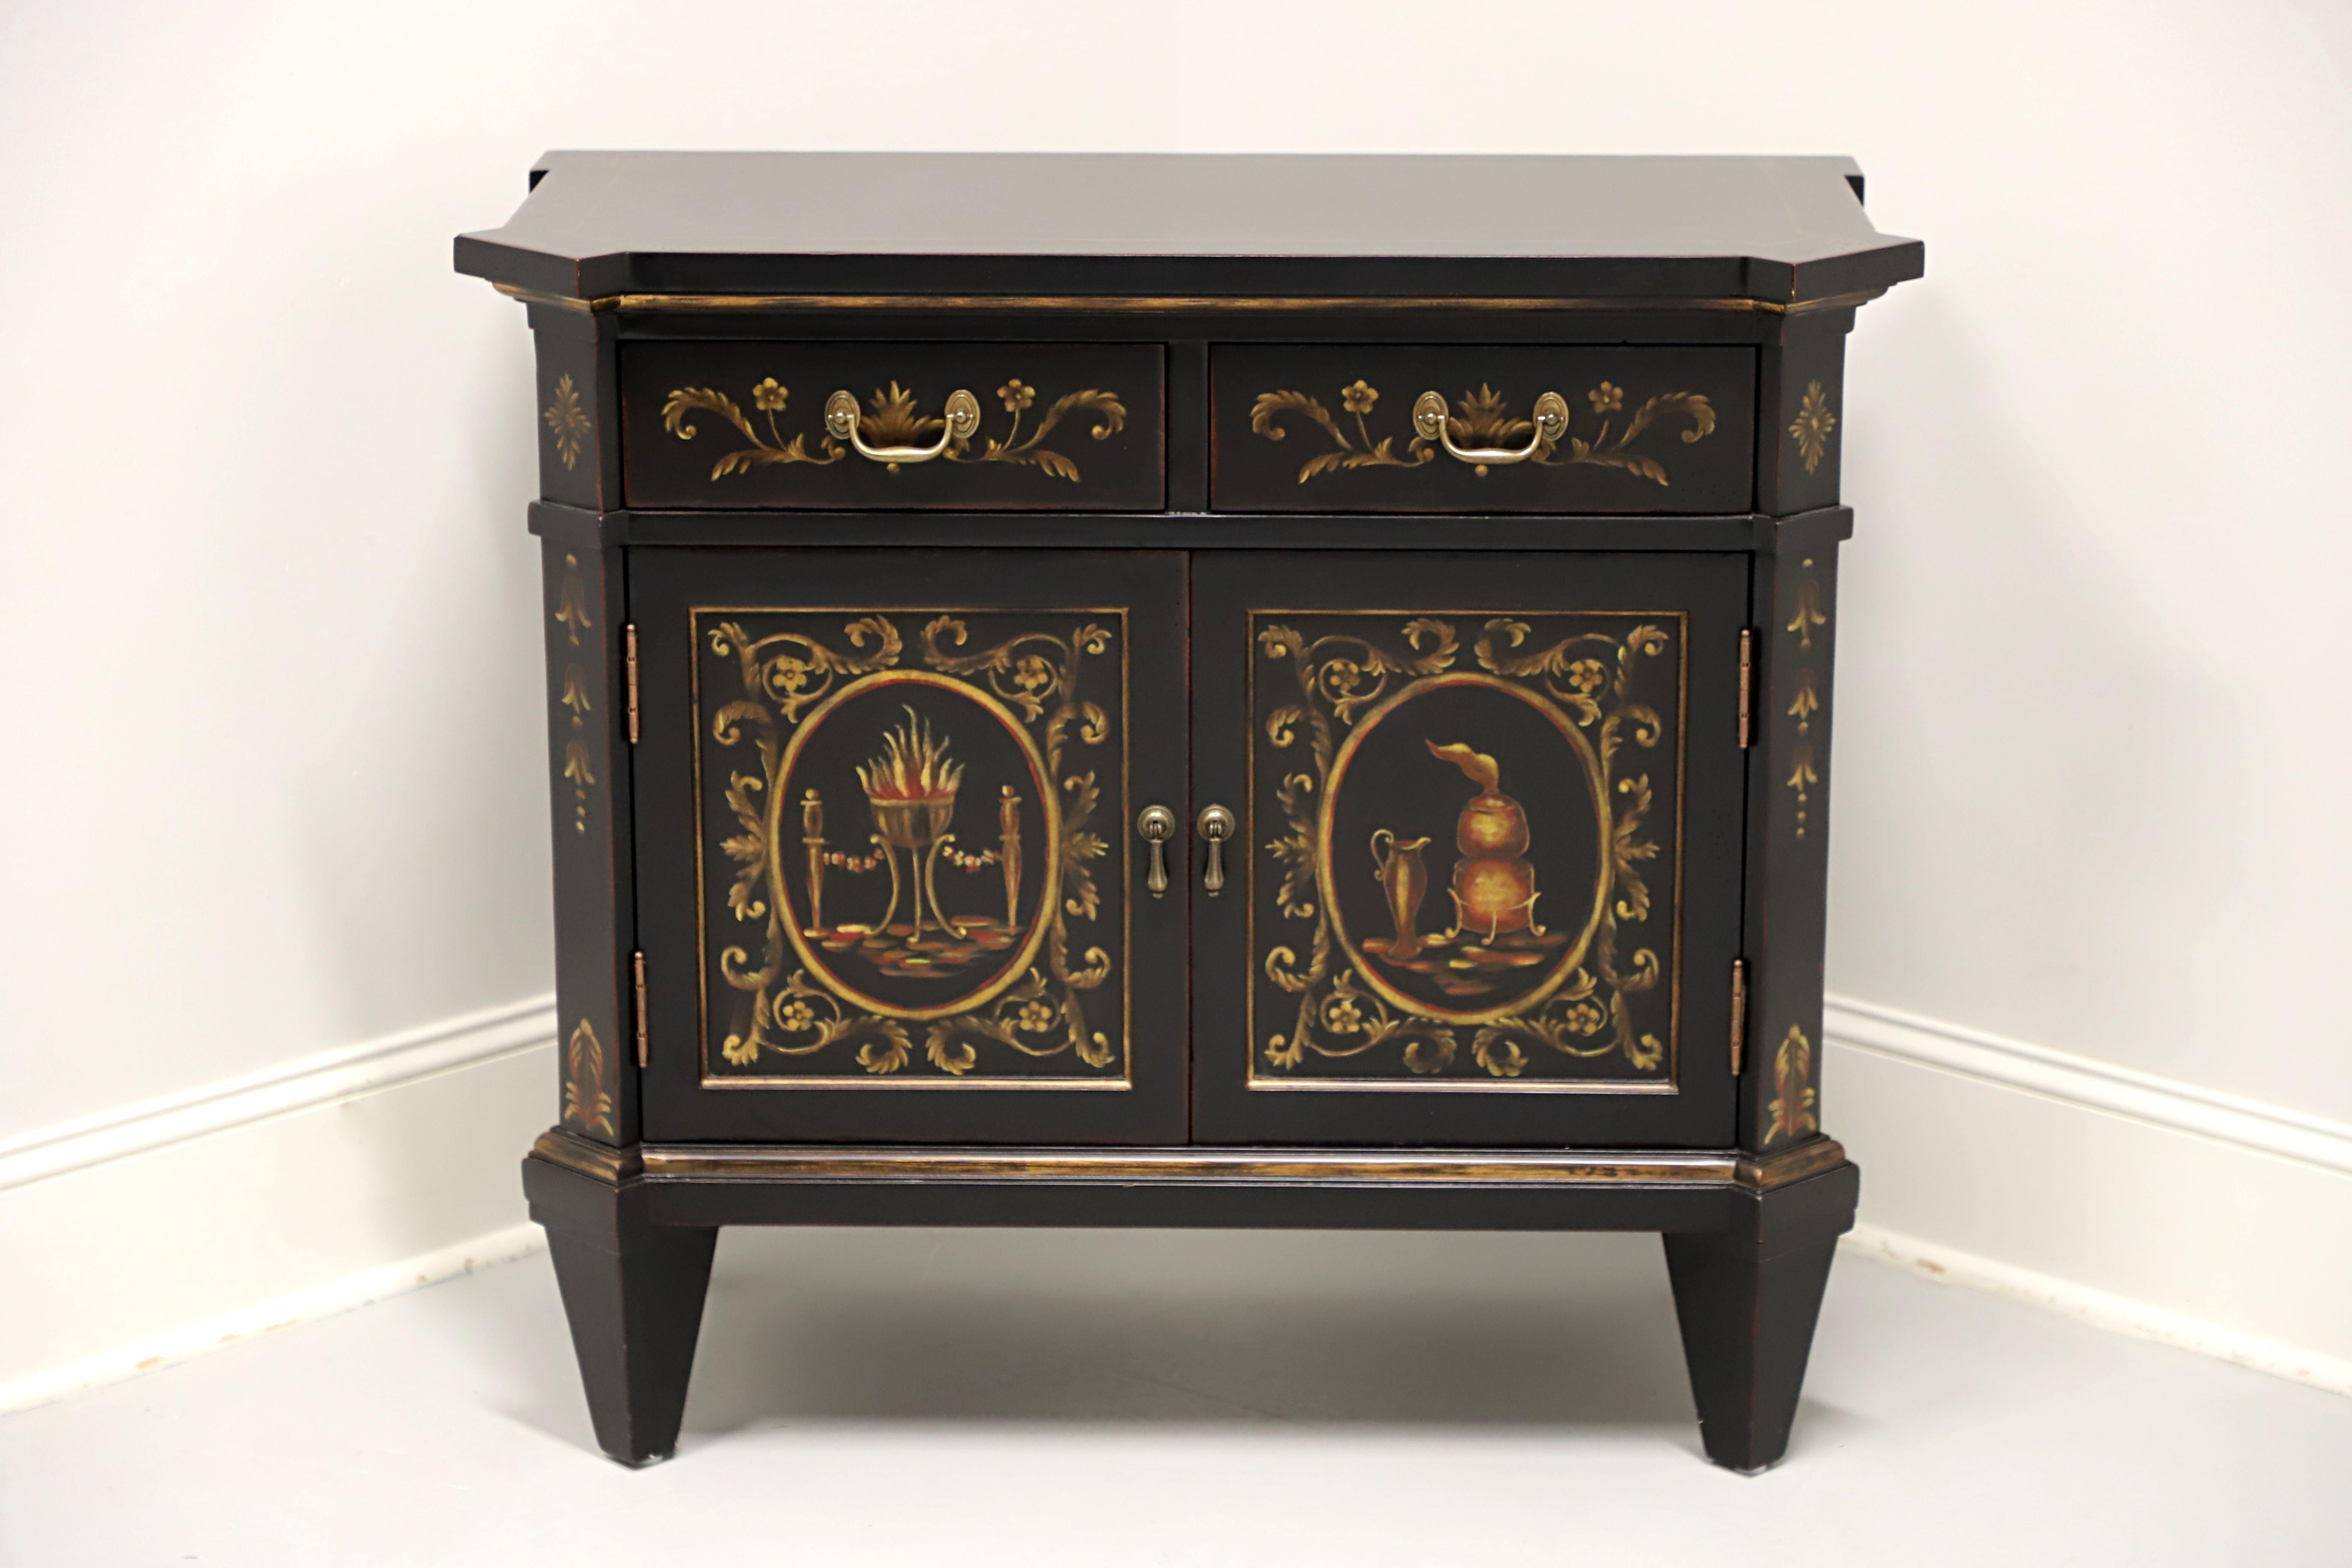 A French Louis XVI style console cabinet, unbranded, similar in quality to Century. Solid hardwood painted black with slight distressing to lend the appear of age, hand painted with scenes in shades of gold & red, gold painted stringing to top,